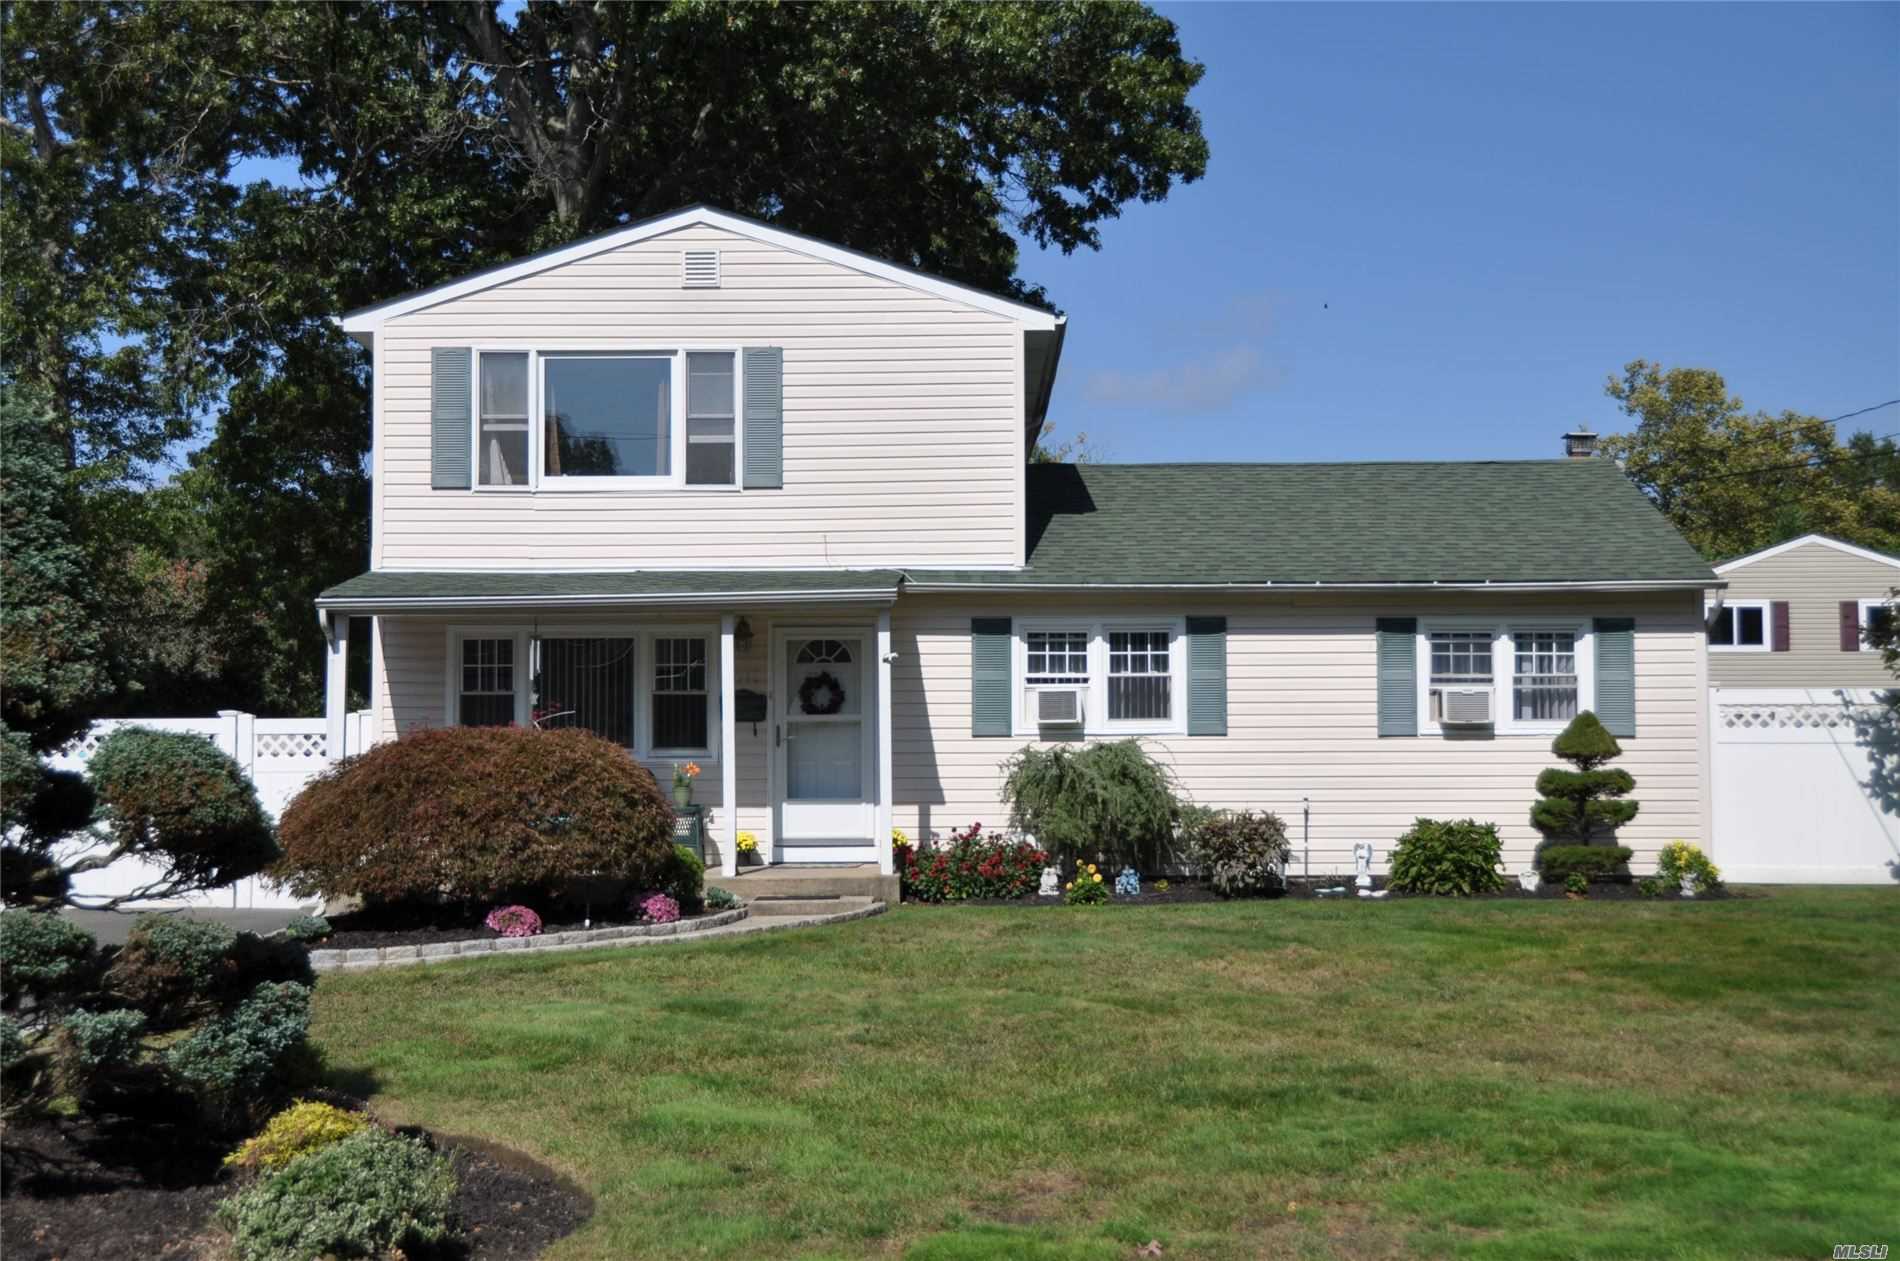 Enjoy this expanded Ranch With An Open Floor Plan. This home is close to Robert Moses & Jones Beaches. A popular boating community and Family fun craft and carnival fairs. Located in the West Islip School district & close to Babylon Village, Long Island railroad and situated on a private cul-de-sac. Come take a look before it&rsquo;s gone!